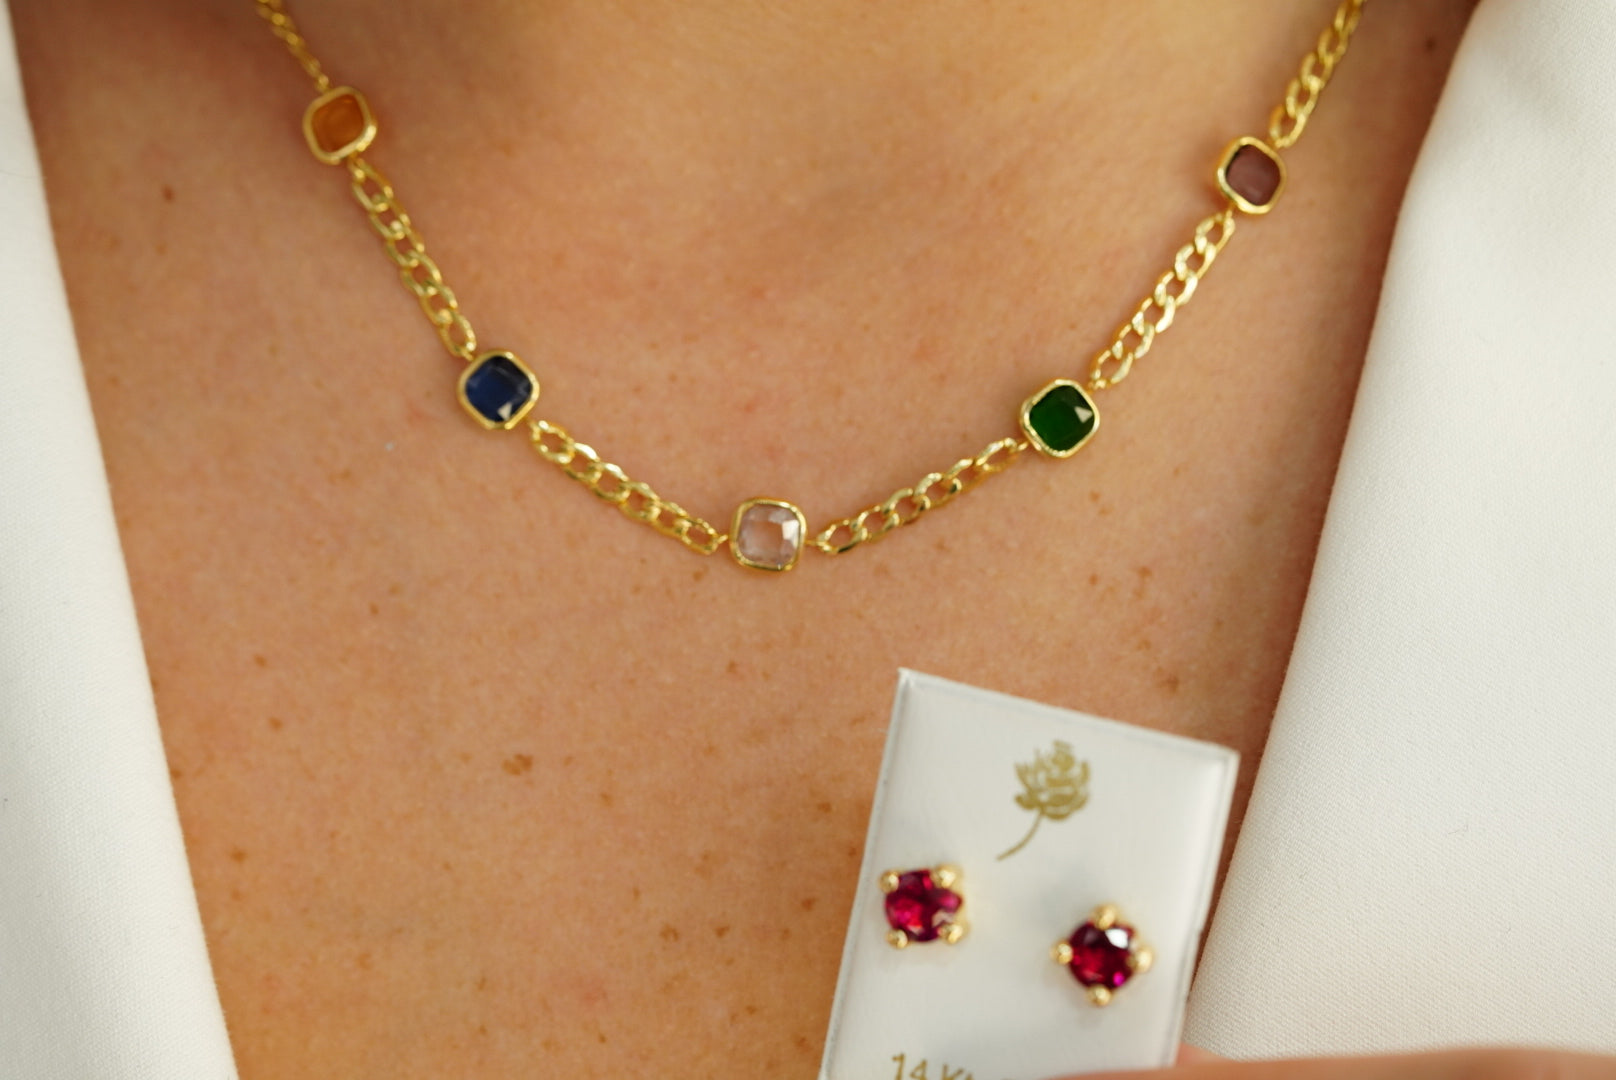 14k Color Stones Necklace, Bracelet and FREE Earring